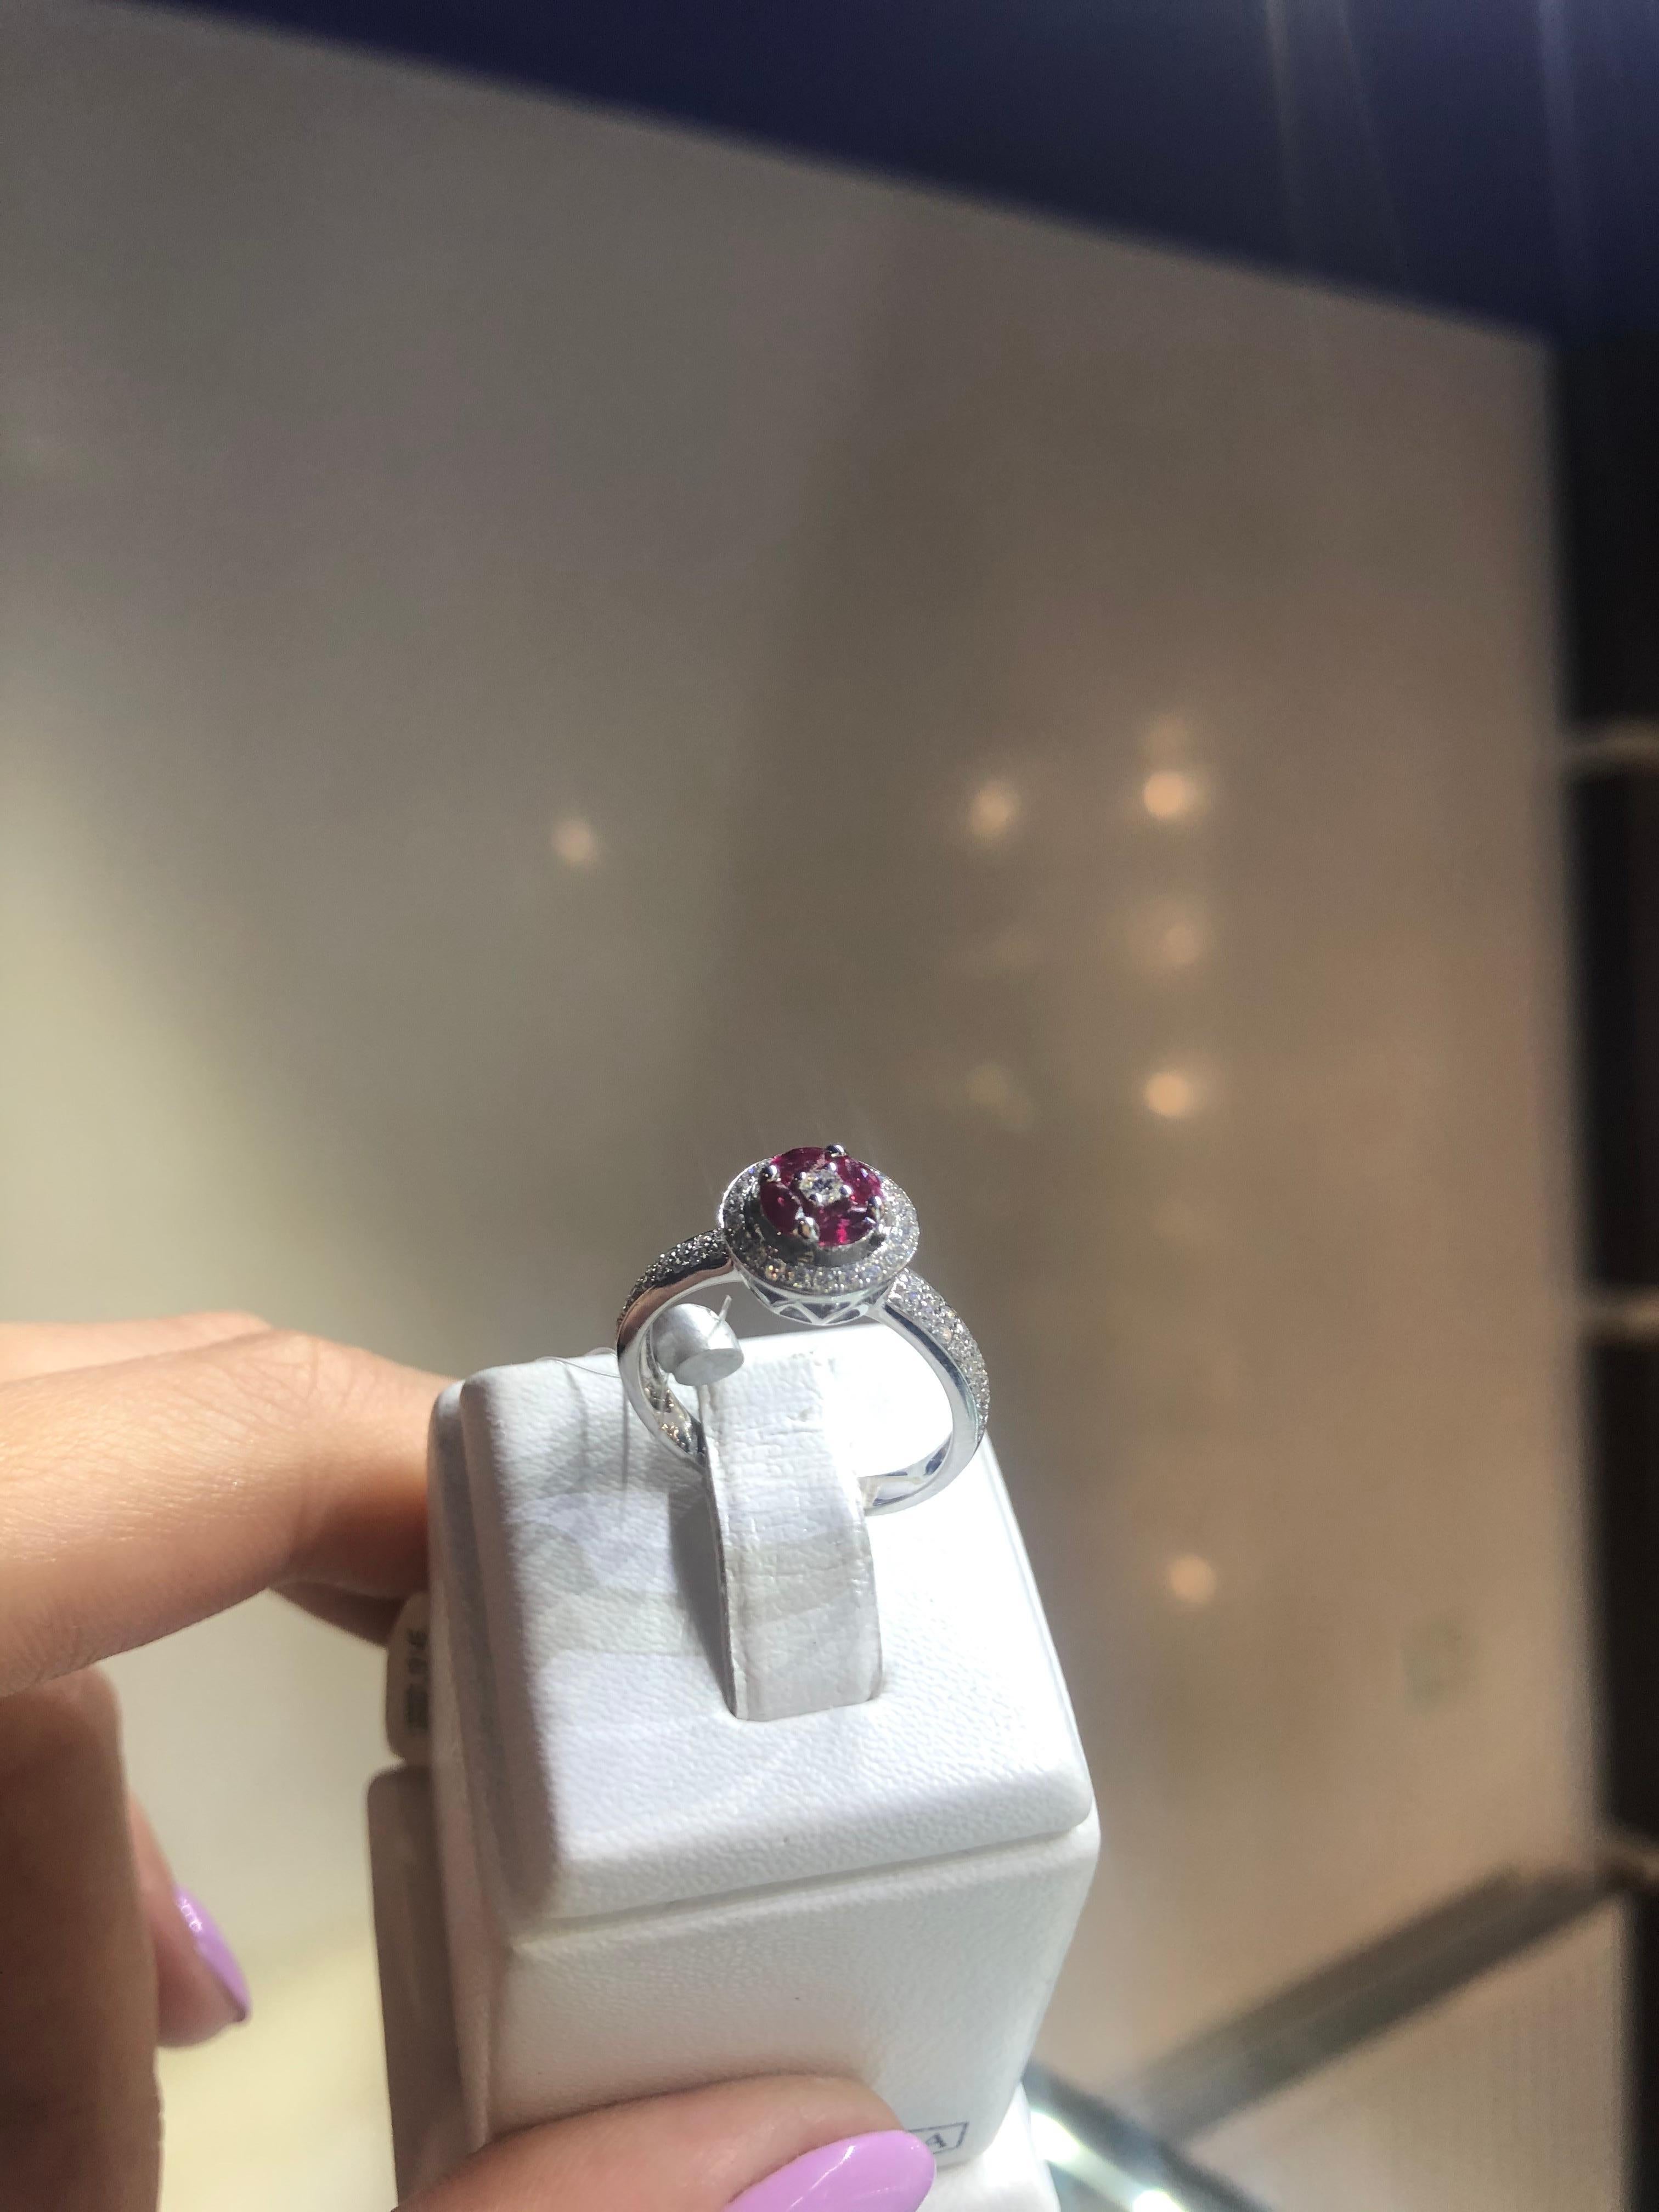 Ring White Gold 14 K (Matching Earrings Available)
Diamond 40-Round 57-0,21ct-4/5A
Ruby 10-25-0,6ct Т(4)/4
Weight 2.26 grams
Size 17 (Adjustable)  


With a heritage of ancient fine Swiss jewelry traditions, NATKINA is a Geneva based jewellery